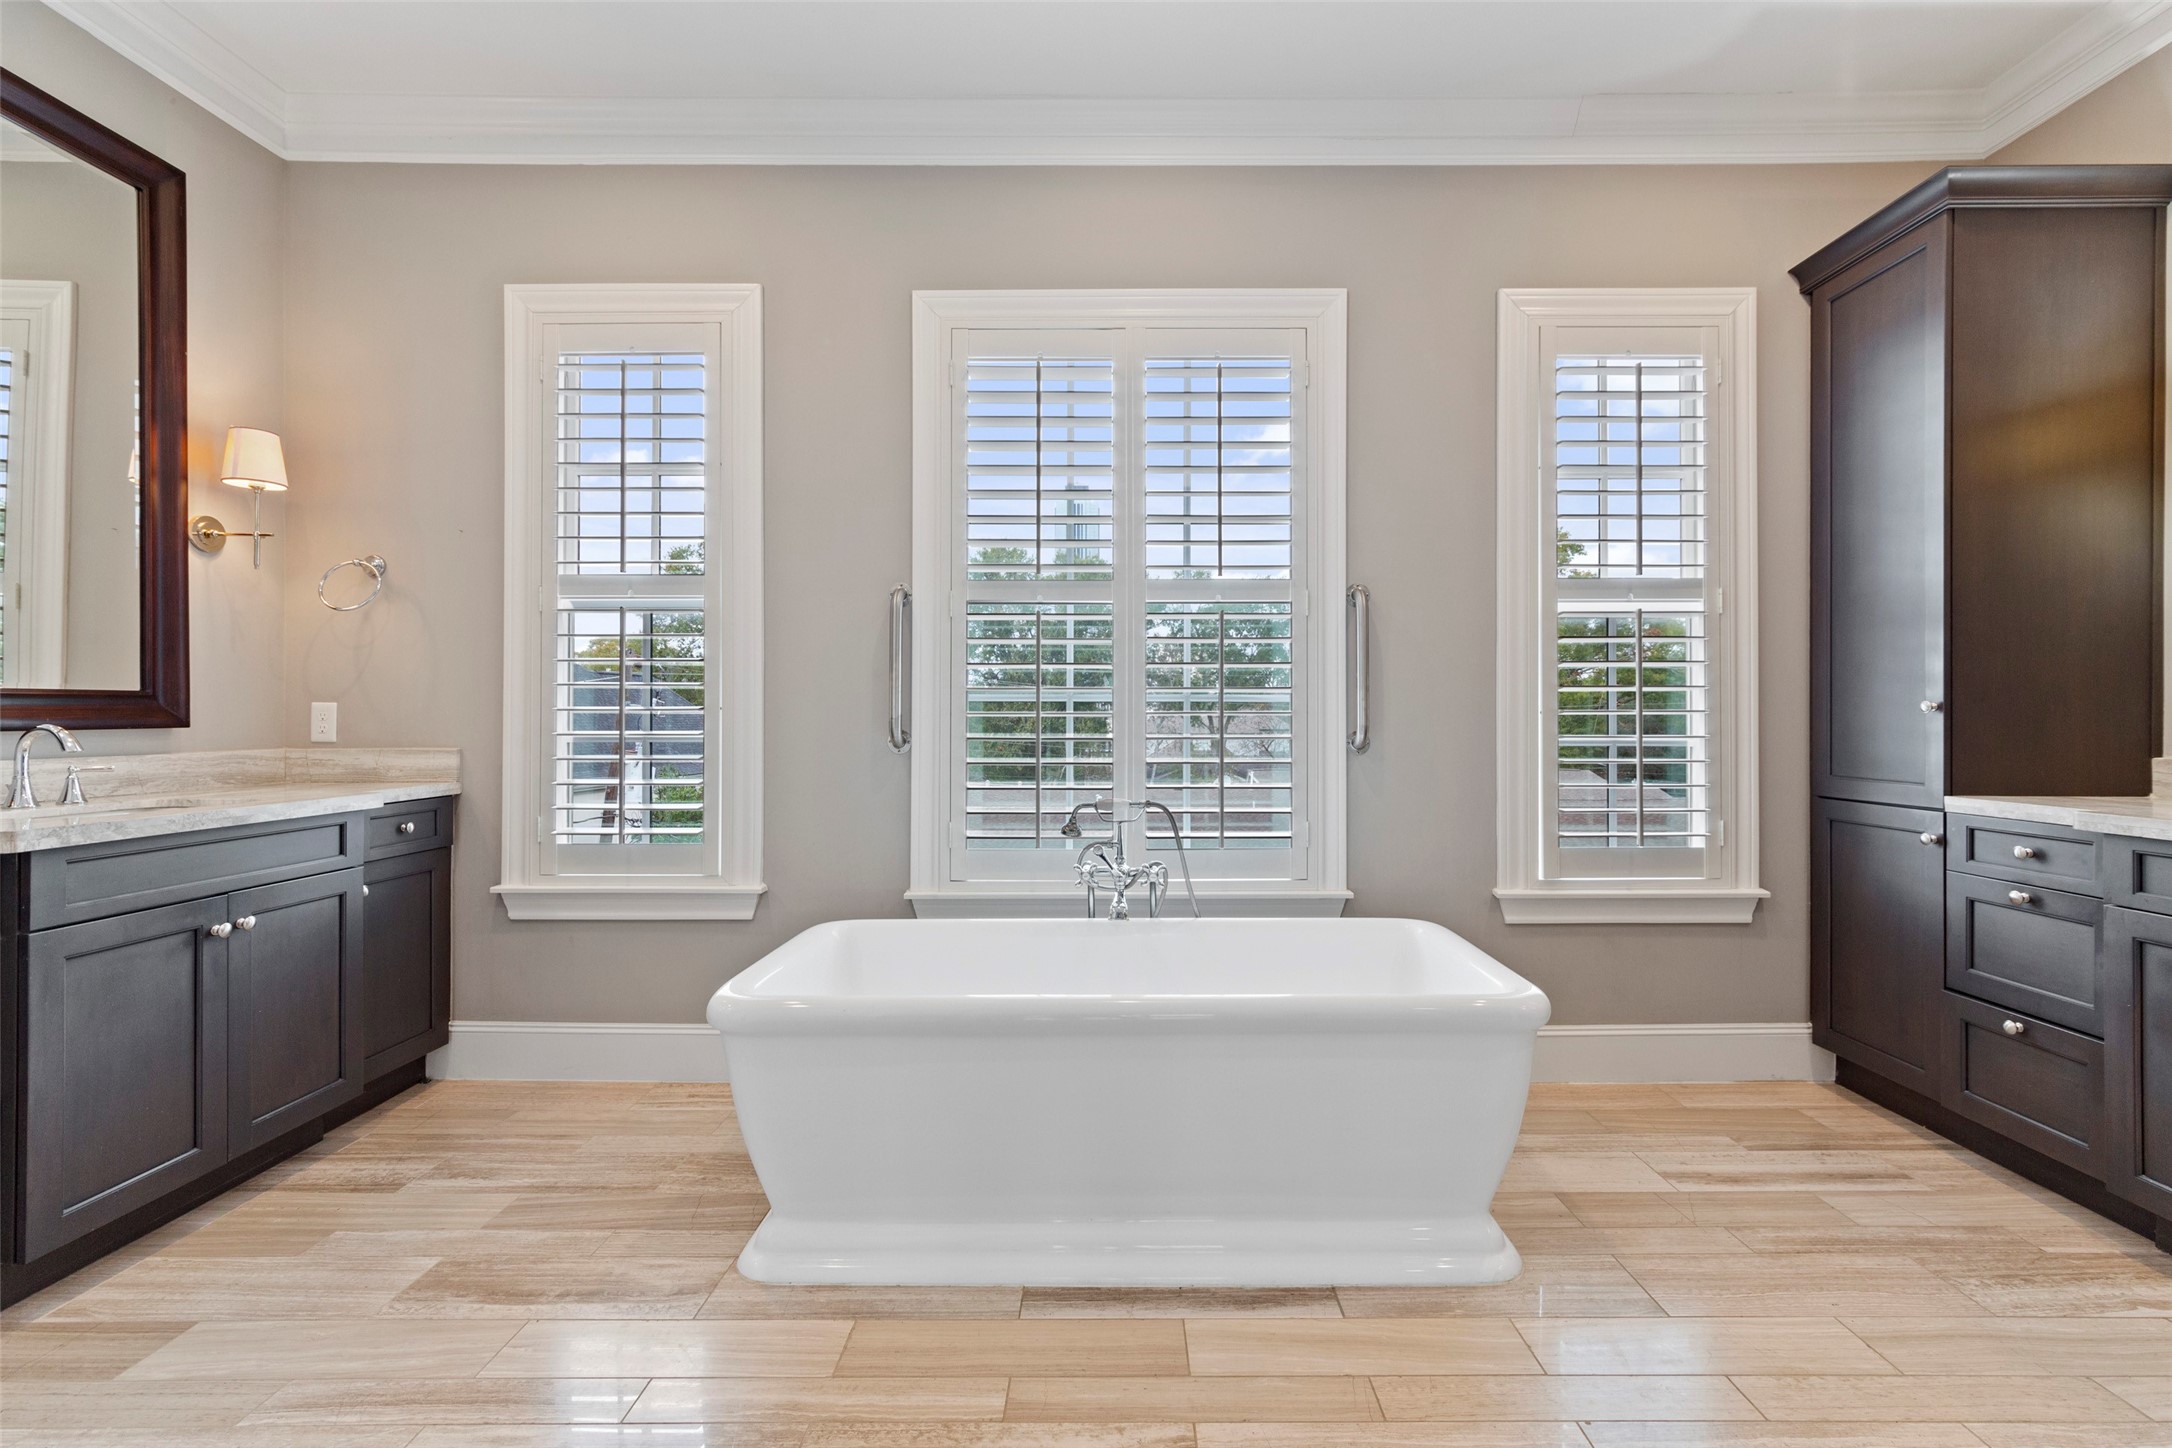 If you are looking for a stunning and functional primary bath, this is it. This large soaking tub with tree top views is just the beginning!